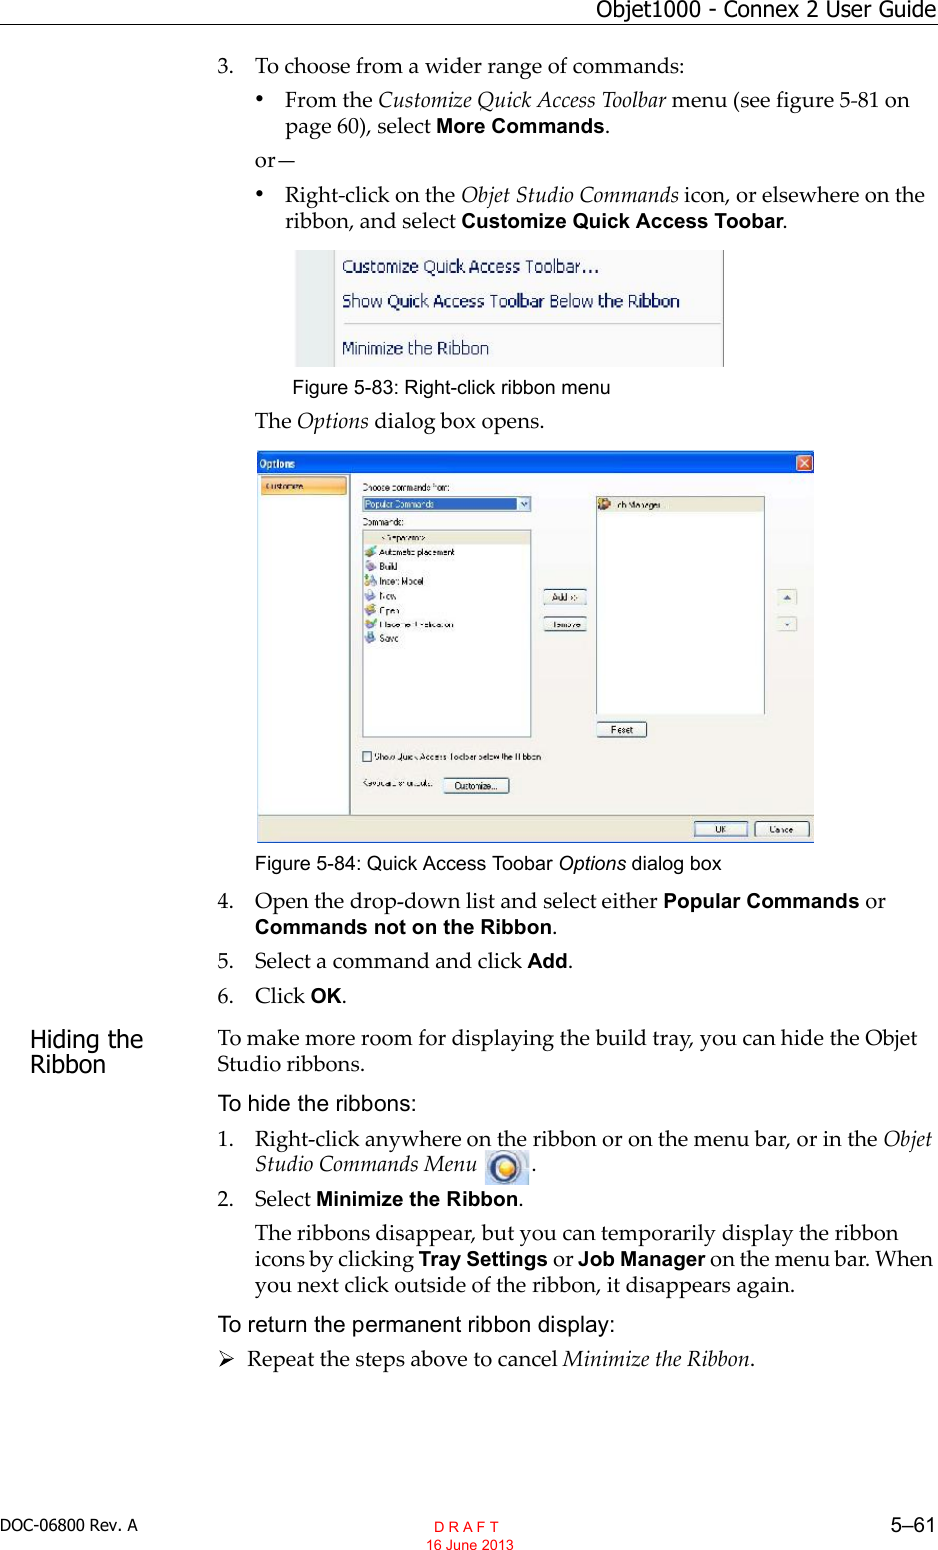 DOC-06800 Rev. A 5–61Objet1000 - Connex 2 User Guide3. To choose from a wider range of commands:•From the Customize Quick Access Toolbar menu (see figure 5 81 onpage 60), select More Commands.or•Right click on the Objet Studio Commands icon, or elsewhere on theribbon, and select Customize Quick Access Toobar.Figure 5-83: Right-click ribbon menuThe Options dialog box opens.Figure 5-84: Quick Access Toobar Options dialog box4. Open the drop down list and select either Popular Commands orCommands not on the Ribbon.5. Select a command and click Add.6. Click OK.Hiding the RibbonTo make more room for displaying the build tray, you can hide the ObjetStudio ribbons.To hide the ribbons:1. Right click anywhere on the ribbon or on the menu bar, or in the ObjetStudio Commands Menu .2. Select Minimize the Ribbon.The ribbons disappear, but you can temporarily display the ribbonicons by clicking Tray Settings or Job Manager on the menu bar. Whenyou next click outside of the ribbon, it disappears again.To return the permanent ribbon display:Repeat the steps above to cancel Minimize the Ribbon.  D R A F T 16 June 2013